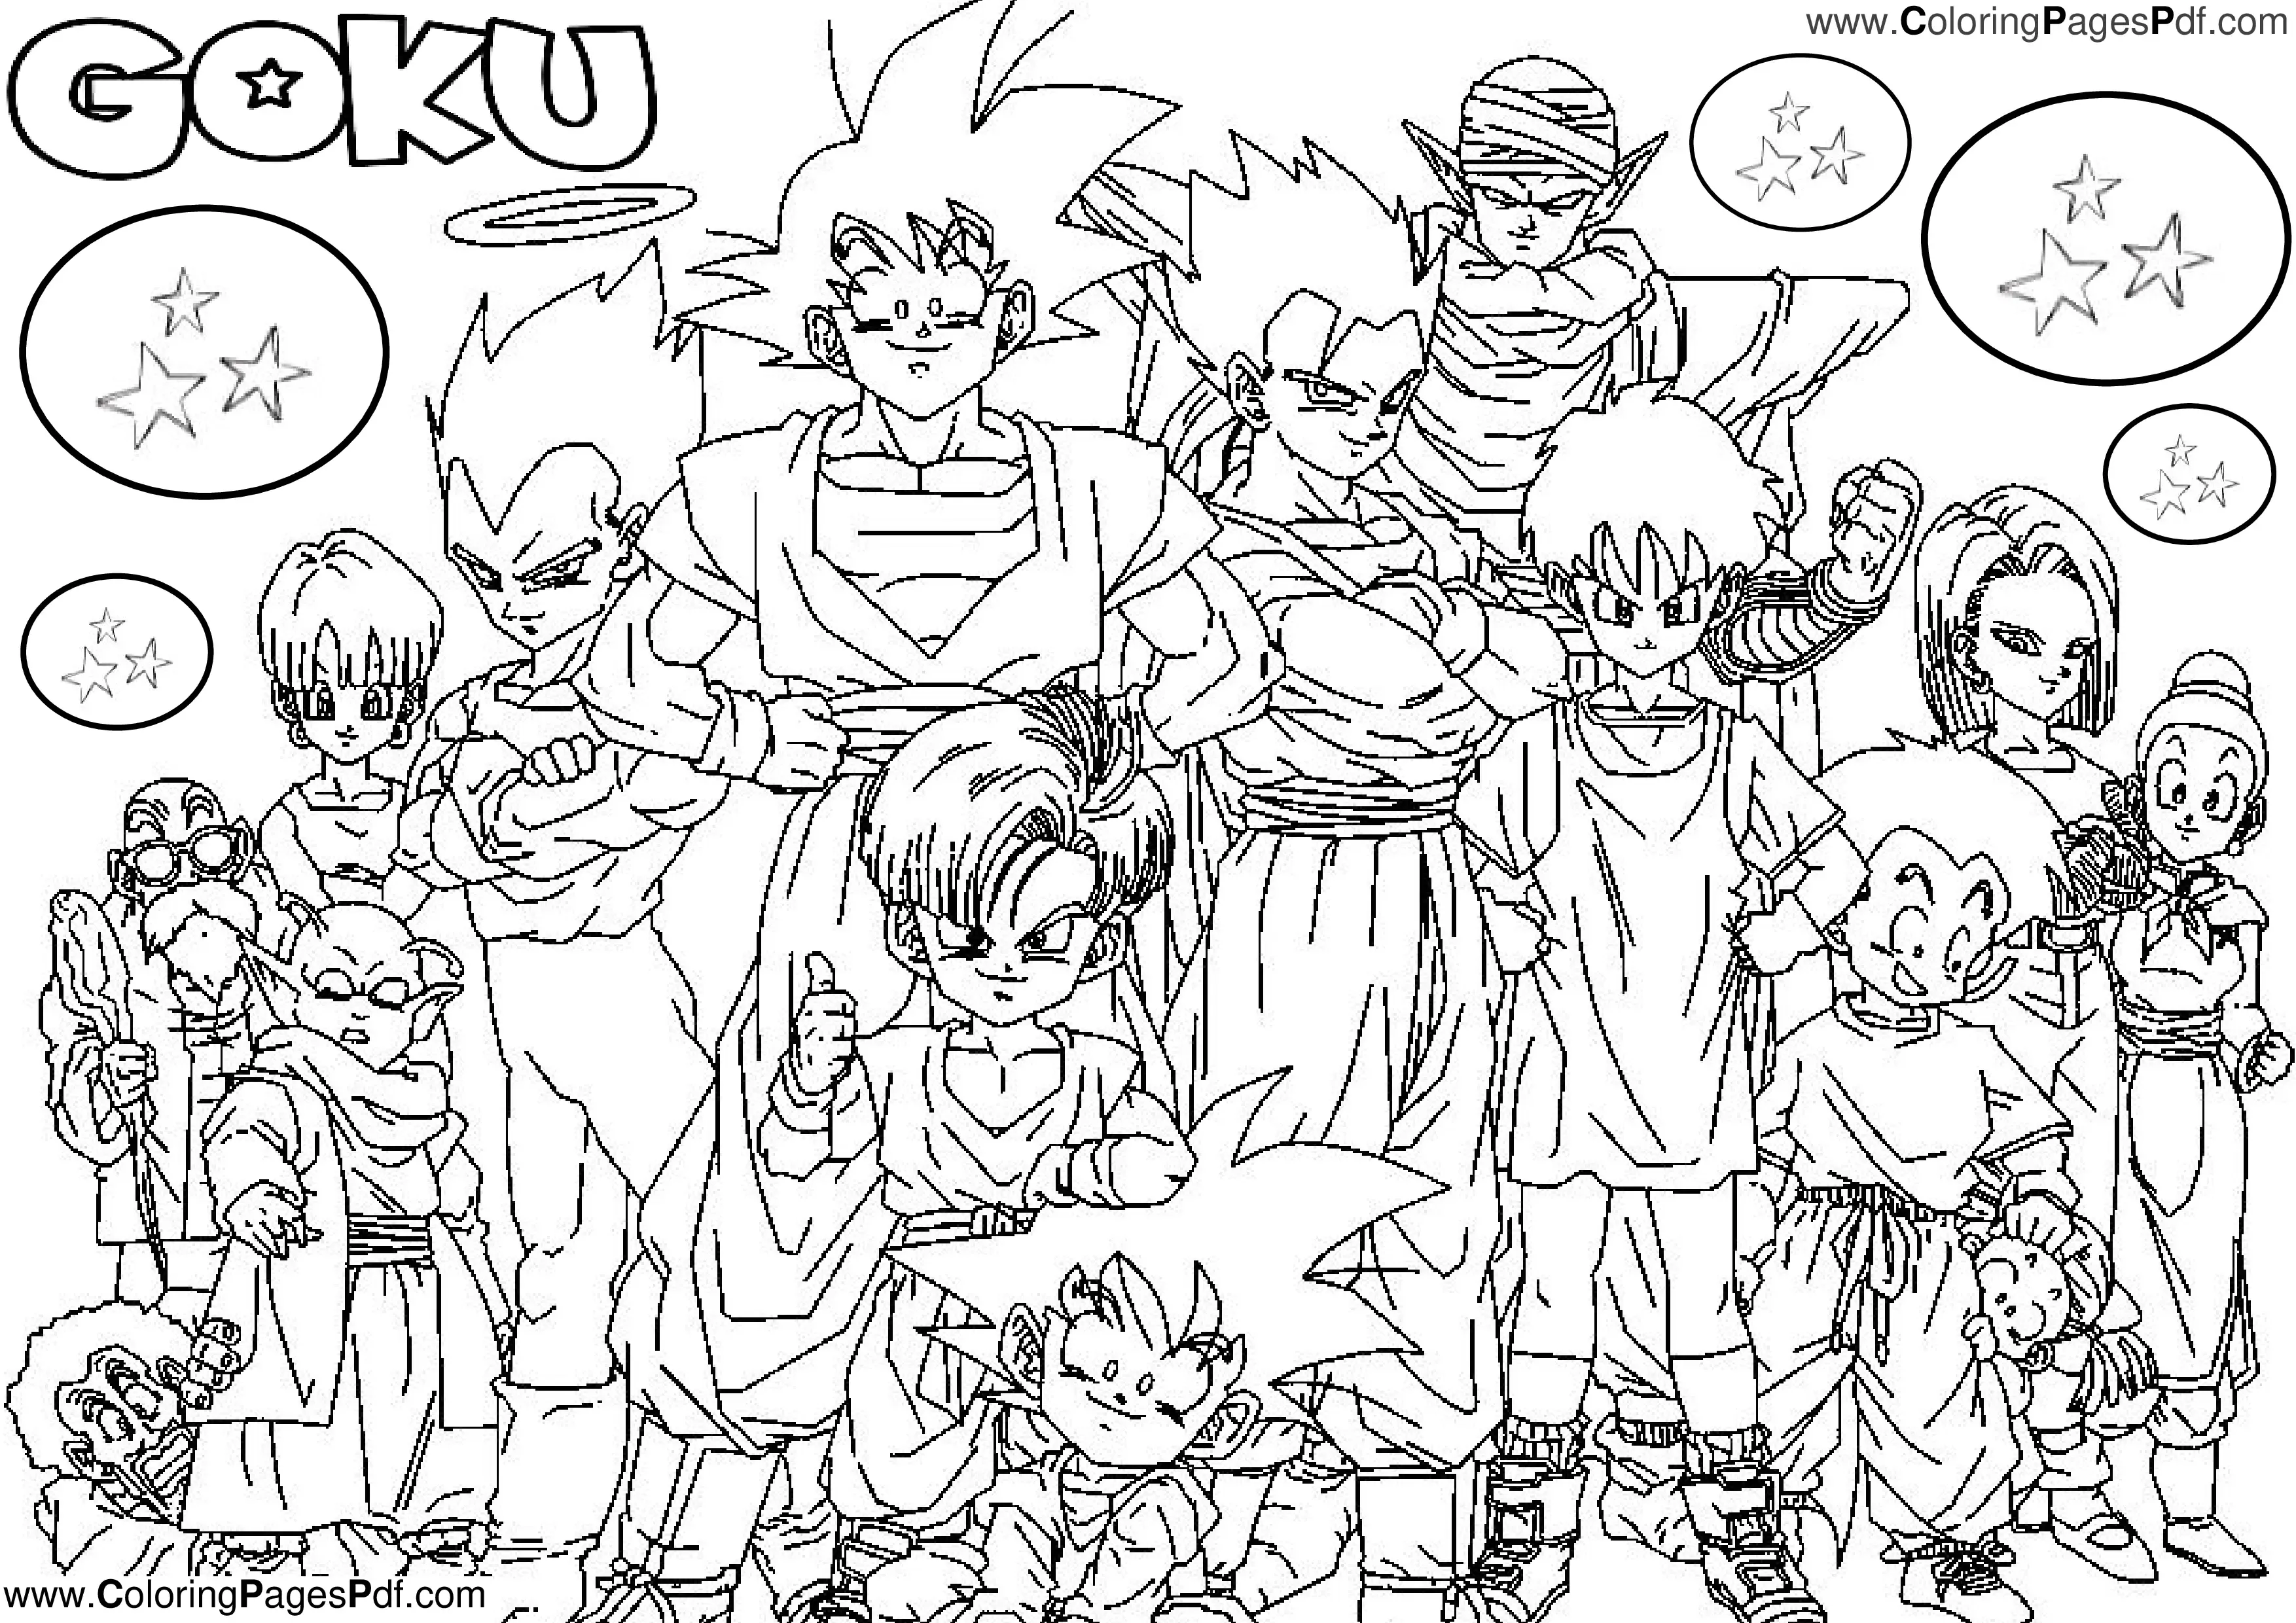 Goku Dragon ball z coloring pages